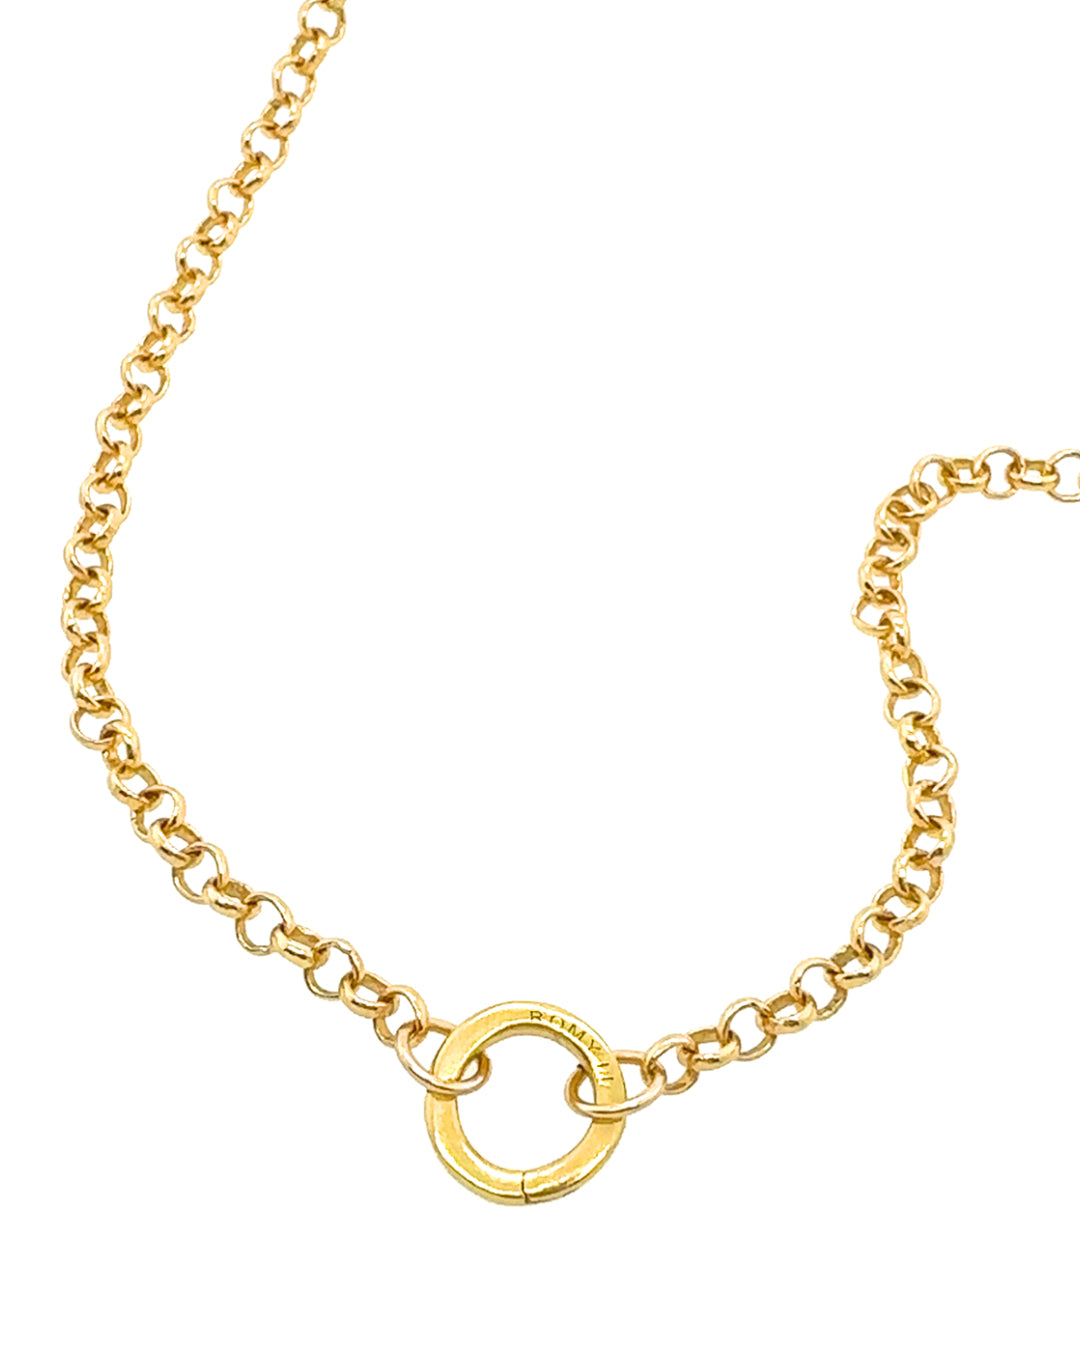 14k Gold fill Rolo annex link clasp necklace 